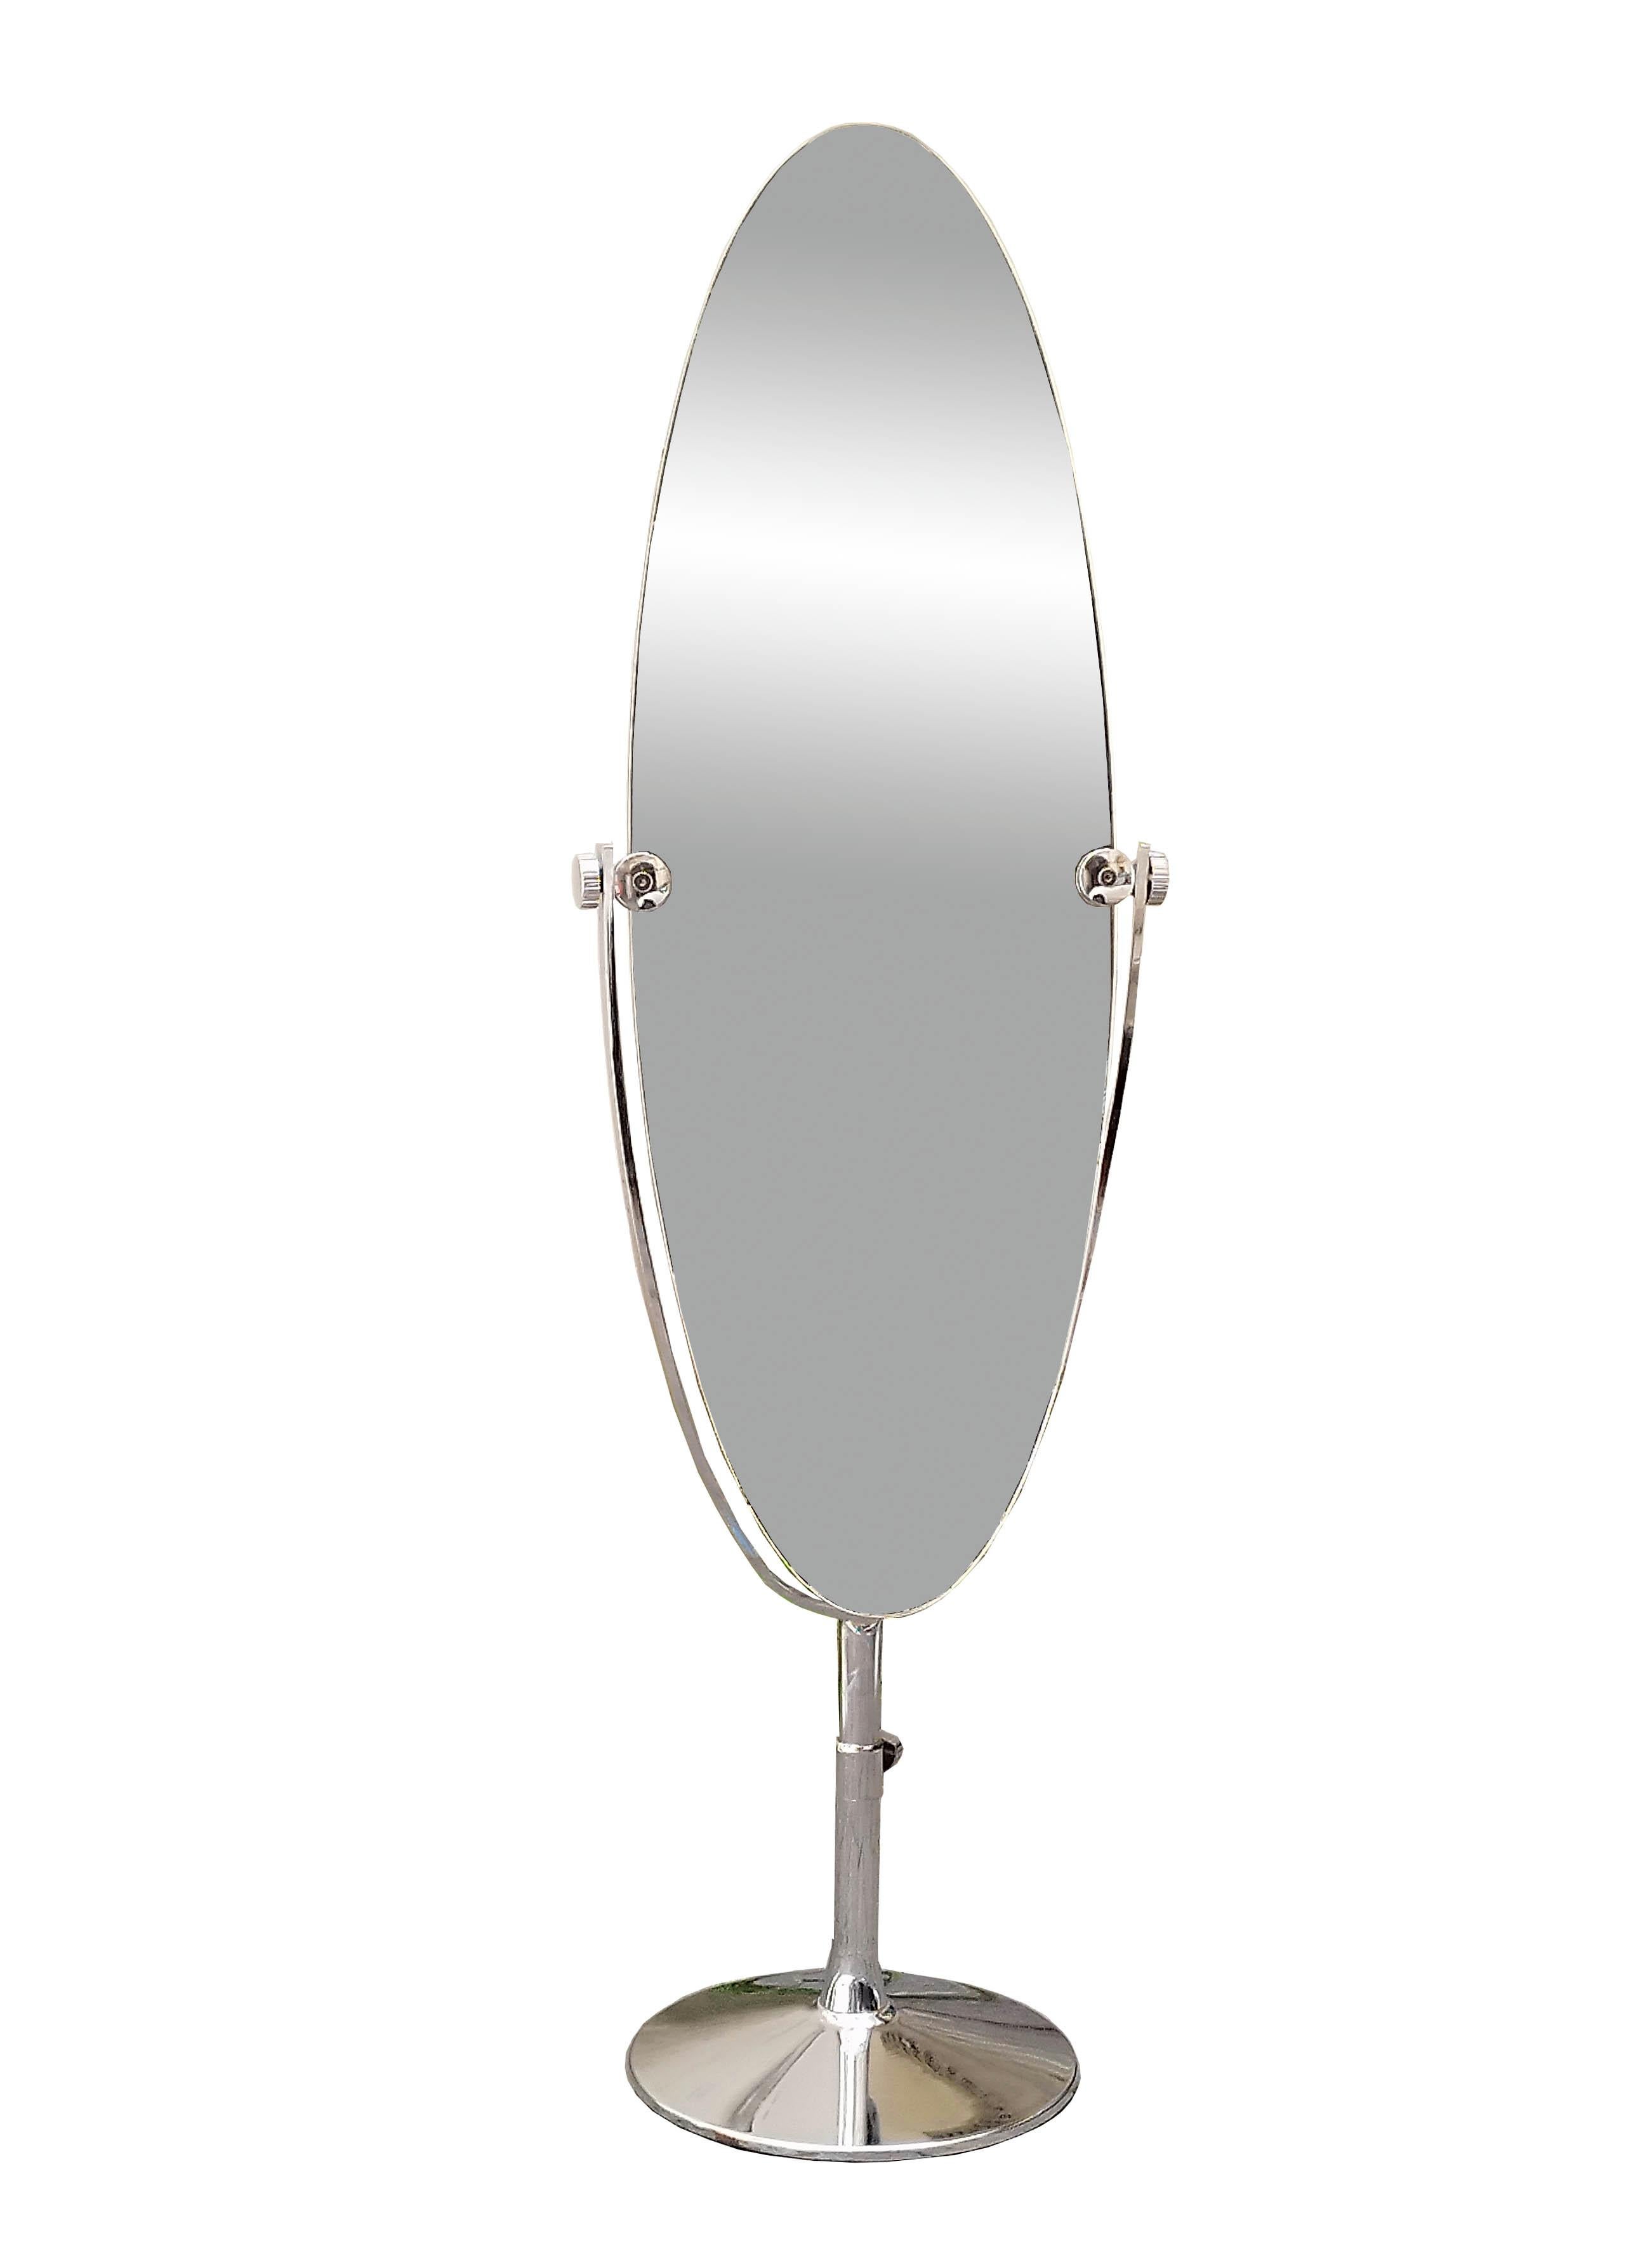 Large oval, bifrontal adjustable tilt floor mirror, with polished chrome metal frame with round base and chrome details 1970.Small flaws from one top of the mirror as pictured